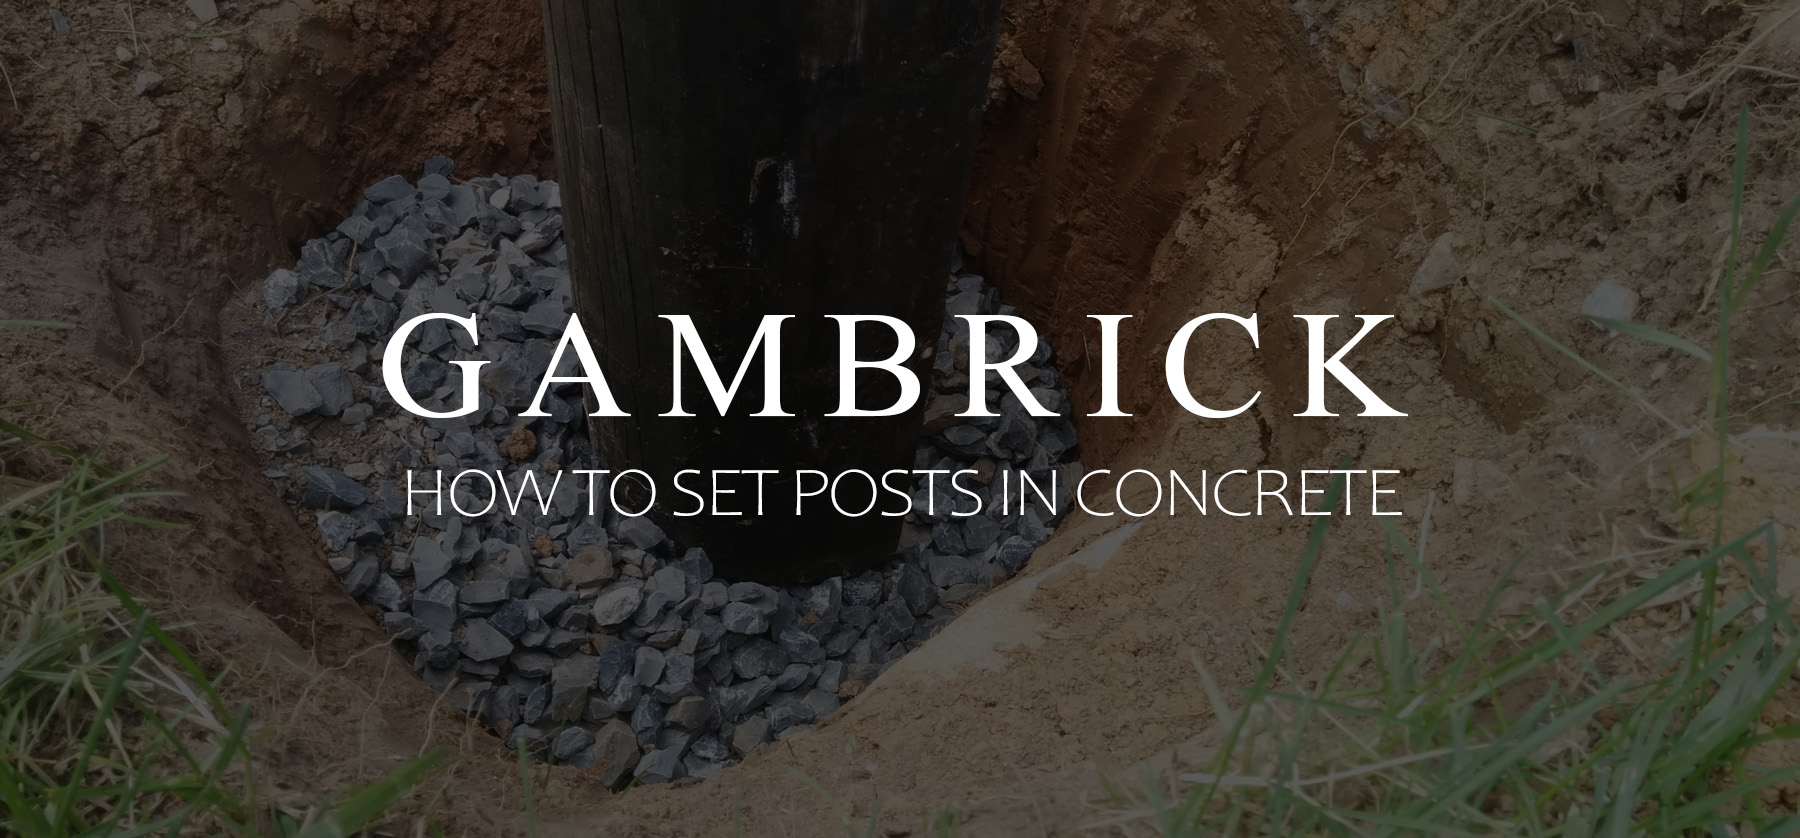 how to set posts in concrete banner pic 1